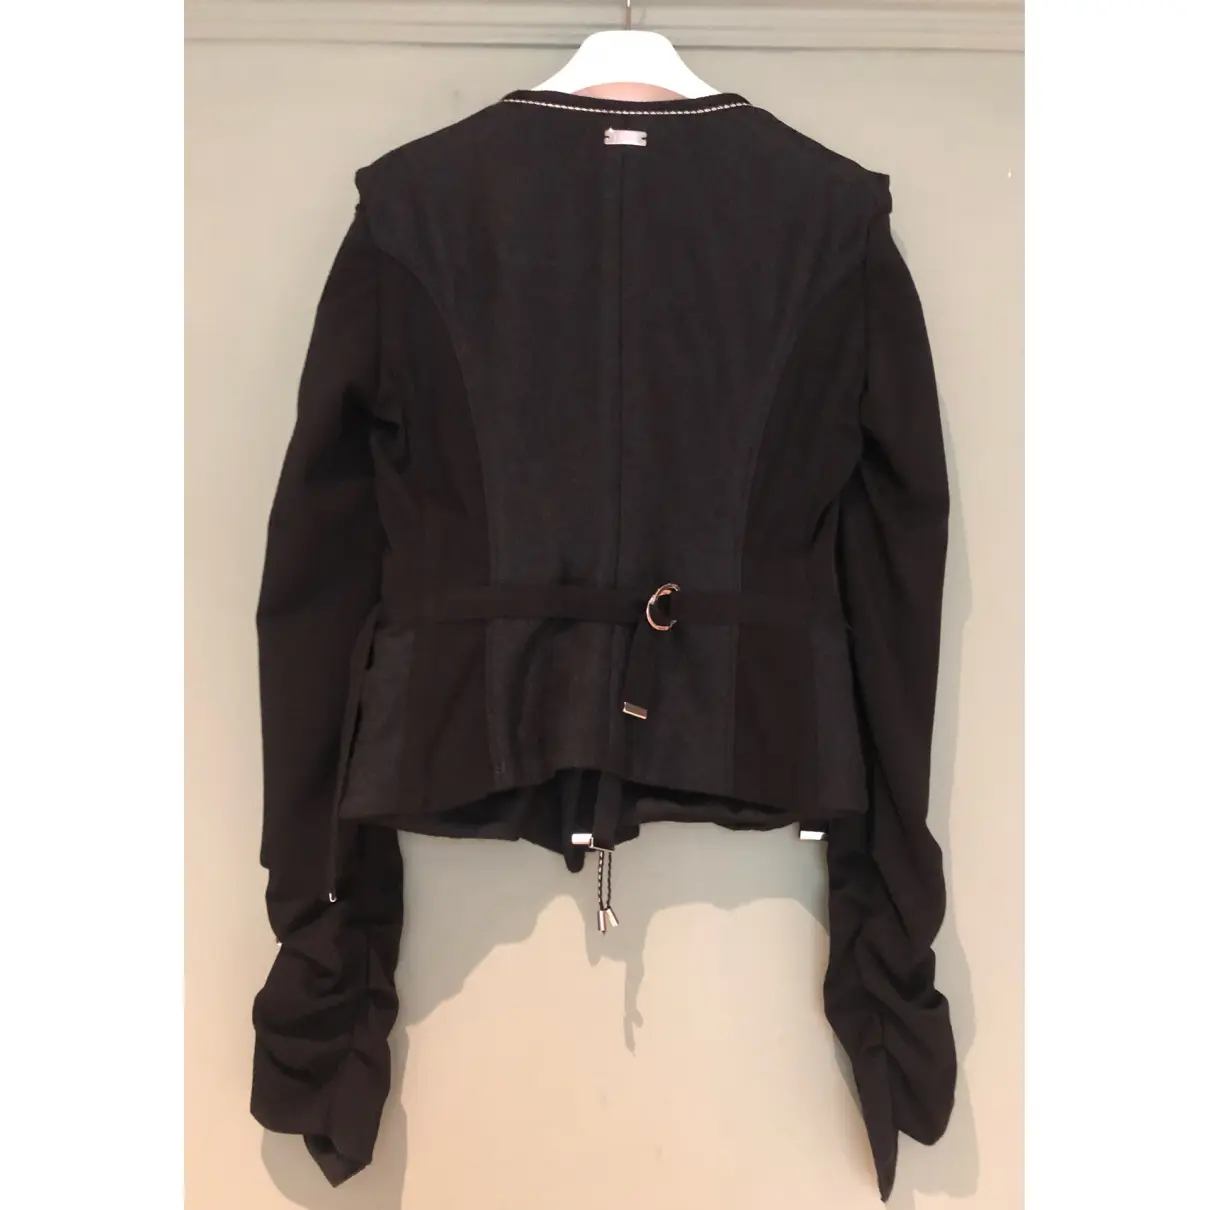 Buy Claire Campbell Jacket online